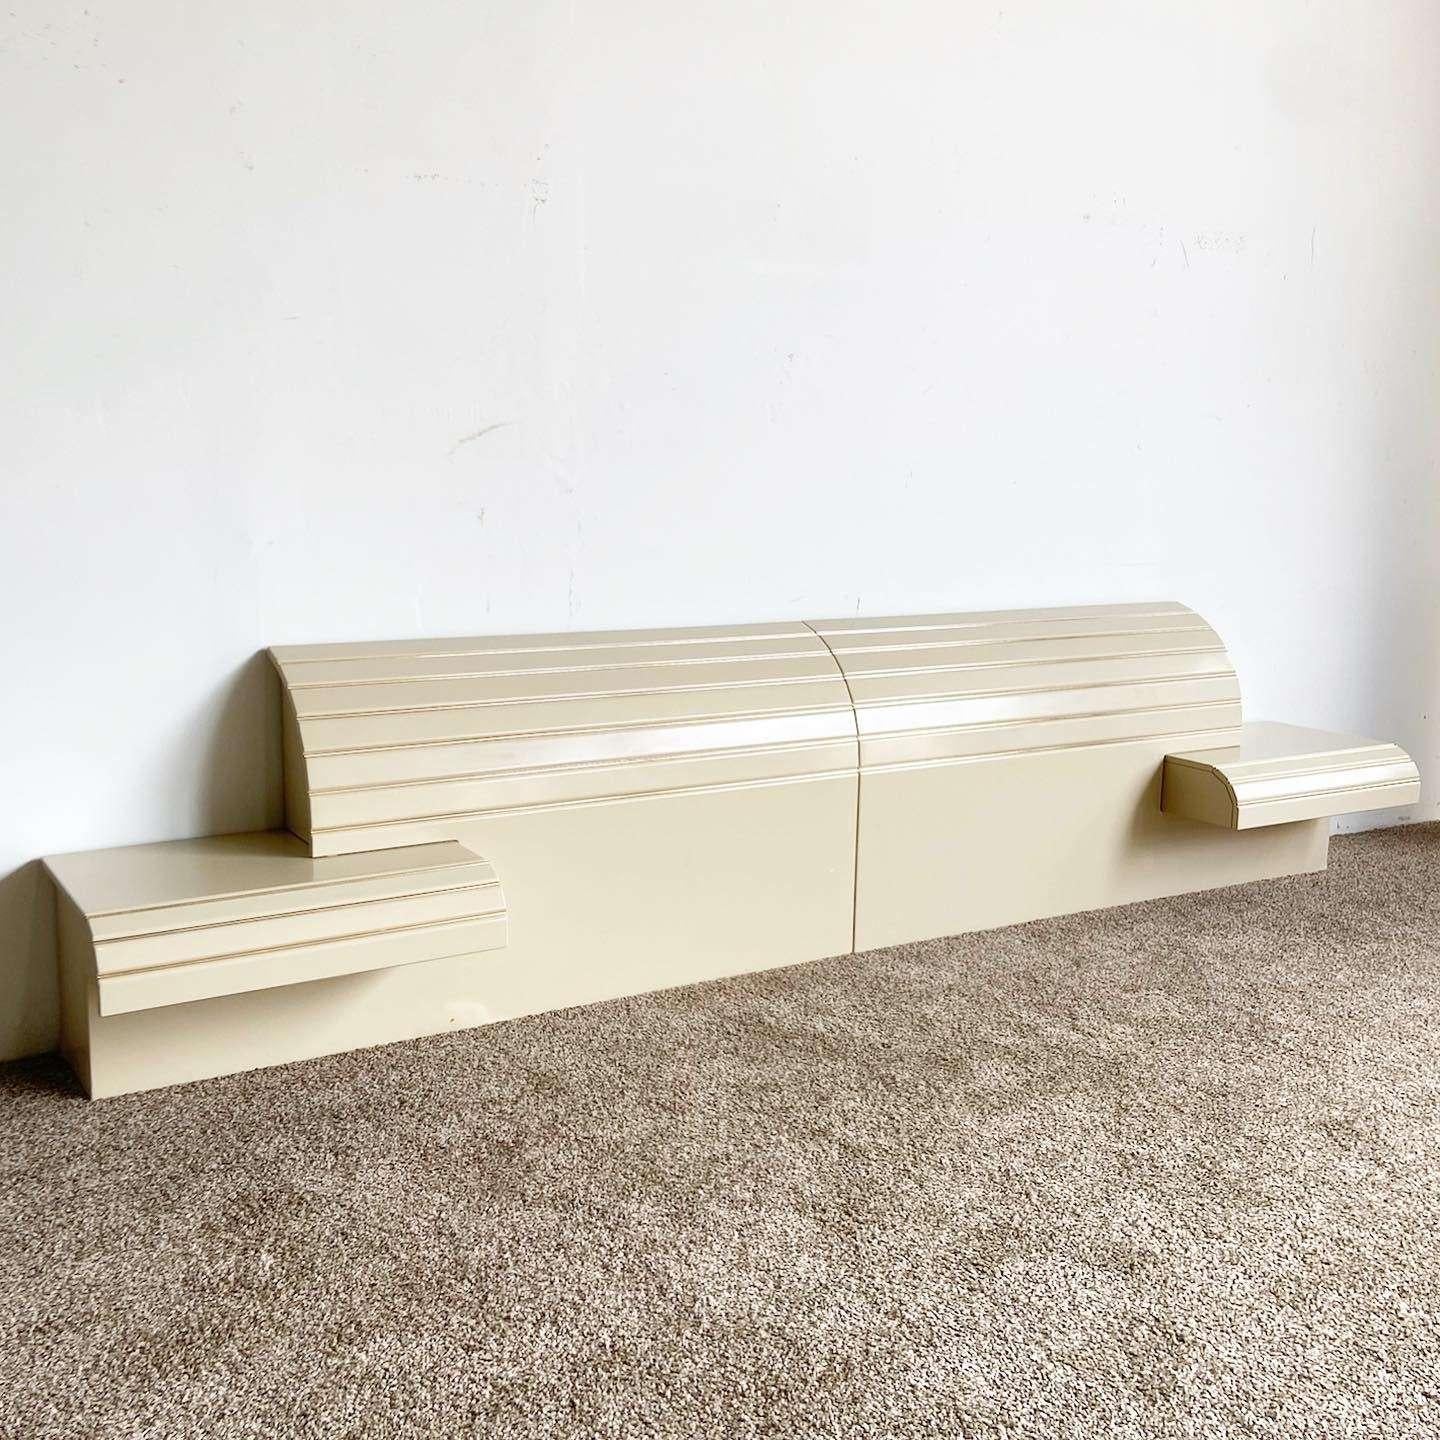 Exceptional vintage postmodern waterfall king size headboard with floating waterfall nightstands by Rougier. Features a cream lacquer with gold accents.

78.5” width between nightstands
Headboard measures 10” deep
Each nightstand measures 28” wide